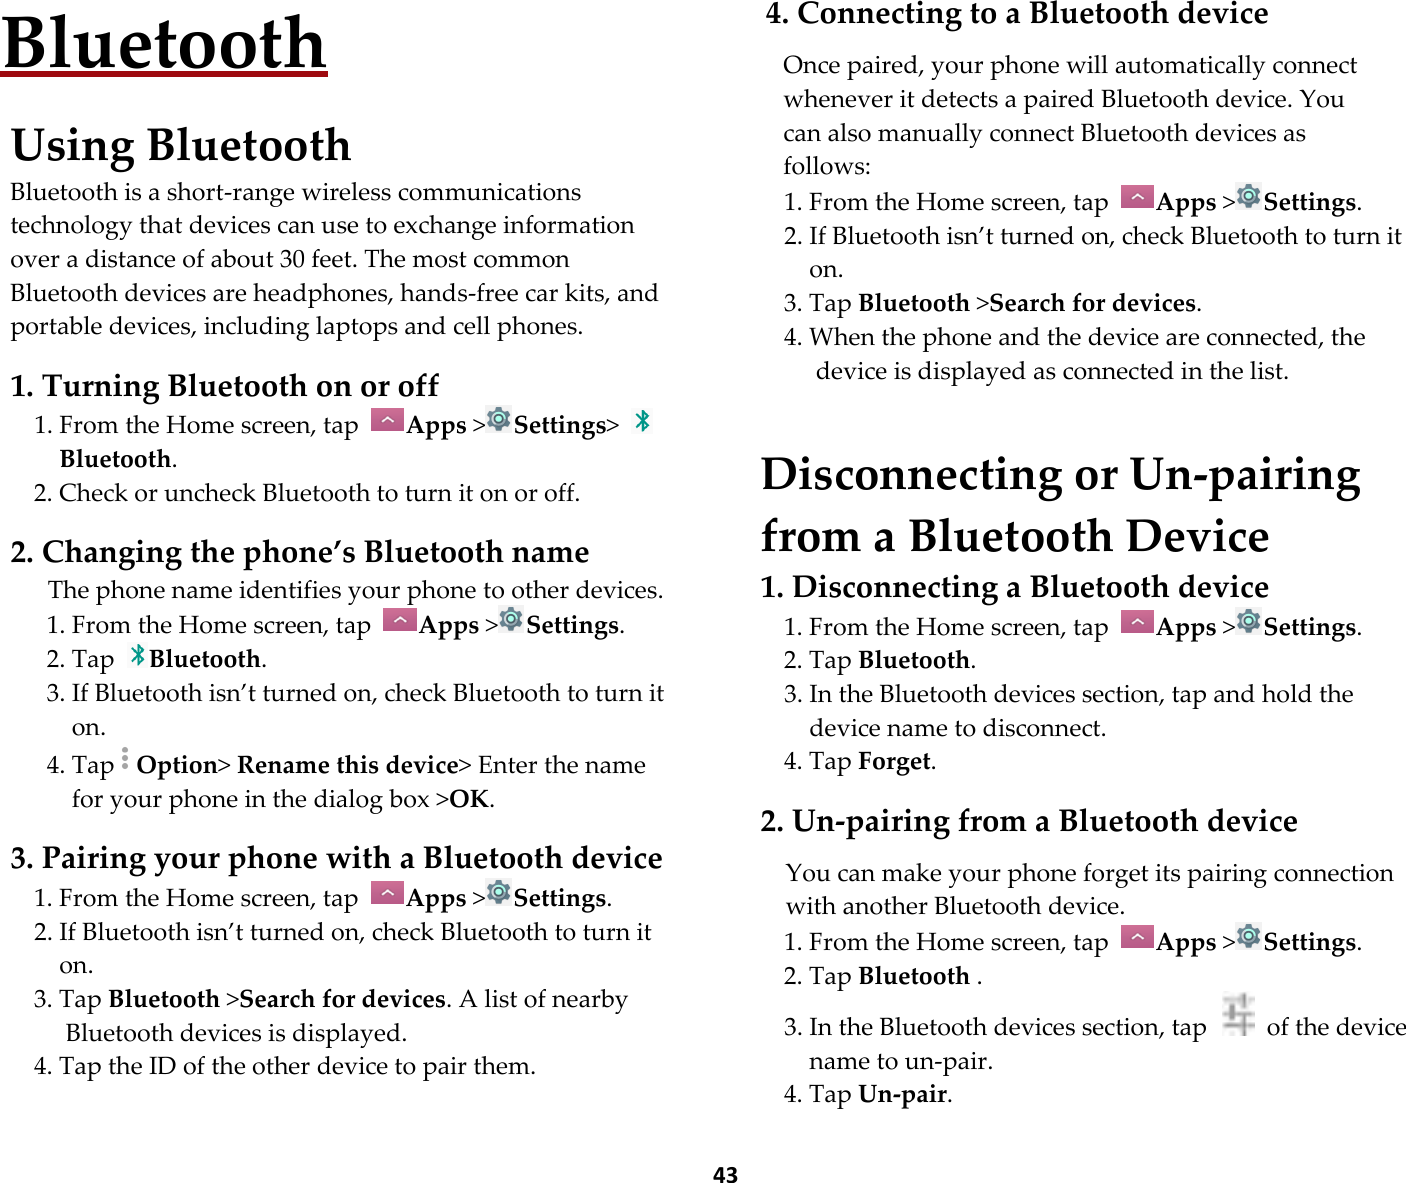  43 Bluetooth  Using Bluetooth Bluetooth is a short-range wireless communications technology that devices can use to exchange information over a distance of about 30 feet. The most common Bluetooth devices are headphones, hands-free car kits, and portable devices, including laptops and cell phones.  1. Turning Bluetooth on or off 1. From the Home screen, tap  Apps &gt;Settings&gt; Bluetooth. 2. Check or uncheck Bluetooth to turn it on or off.  2. Changing the phone’s Bluetooth name The phone name identifies your phone to other devices. 1. From the Home screen, tap  Apps &gt;Settings. 2. Tap  Bluetooth. 3. If Bluetooth isn’t turned on, check Bluetooth to turn it on. 4. Tap Option&gt; Rename this device&gt; Enter the name for your phone in the dialog box &gt;OK.  3. Pairing your phone with a Bluetooth device 1. From the Home screen, tap  Apps &gt;Settings. 2. If Bluetooth isn’t turned on, check Bluetooth to turn it on. 3. Tap Bluetooth &gt;Search for devices. A list of nearby Bluetooth devices is displayed. 4. Tap the ID of the other device to pair them.  4. Connecting to a Bluetooth device  Once paired, your phone will automatically connect whenever it detects a paired Bluetooth device. You can also manually connect Bluetooth devices as   follows: 1. From the Home screen, tap  Apps &gt;Settings. 2. If Bluetooth isn’t turned on, check Bluetooth to turn it on. 3. Tap Bluetooth &gt;Search for devices. 4. When the phone and the device are connected, the device is displayed as connected in the list.   Disconnecting or Un-pairing from a Bluetooth Device 1. Disconnecting a Bluetooth device 1. From the Home screen, tap  Apps &gt;Settings. 2. Tap Bluetooth. 3. In the Bluetooth devices section, tap and hold the device name to disconnect. 4. Tap Forget.  2. Un-pairing from a Bluetooth device  You can make your phone forget its pairing connection with another Bluetooth device. 1. From the Home screen, tap  Apps &gt;Settings. 2. Tap Bluetooth . 3. In the Bluetooth devices section, tap    of the device name to un-pair. 4. Tap Un-pair. 